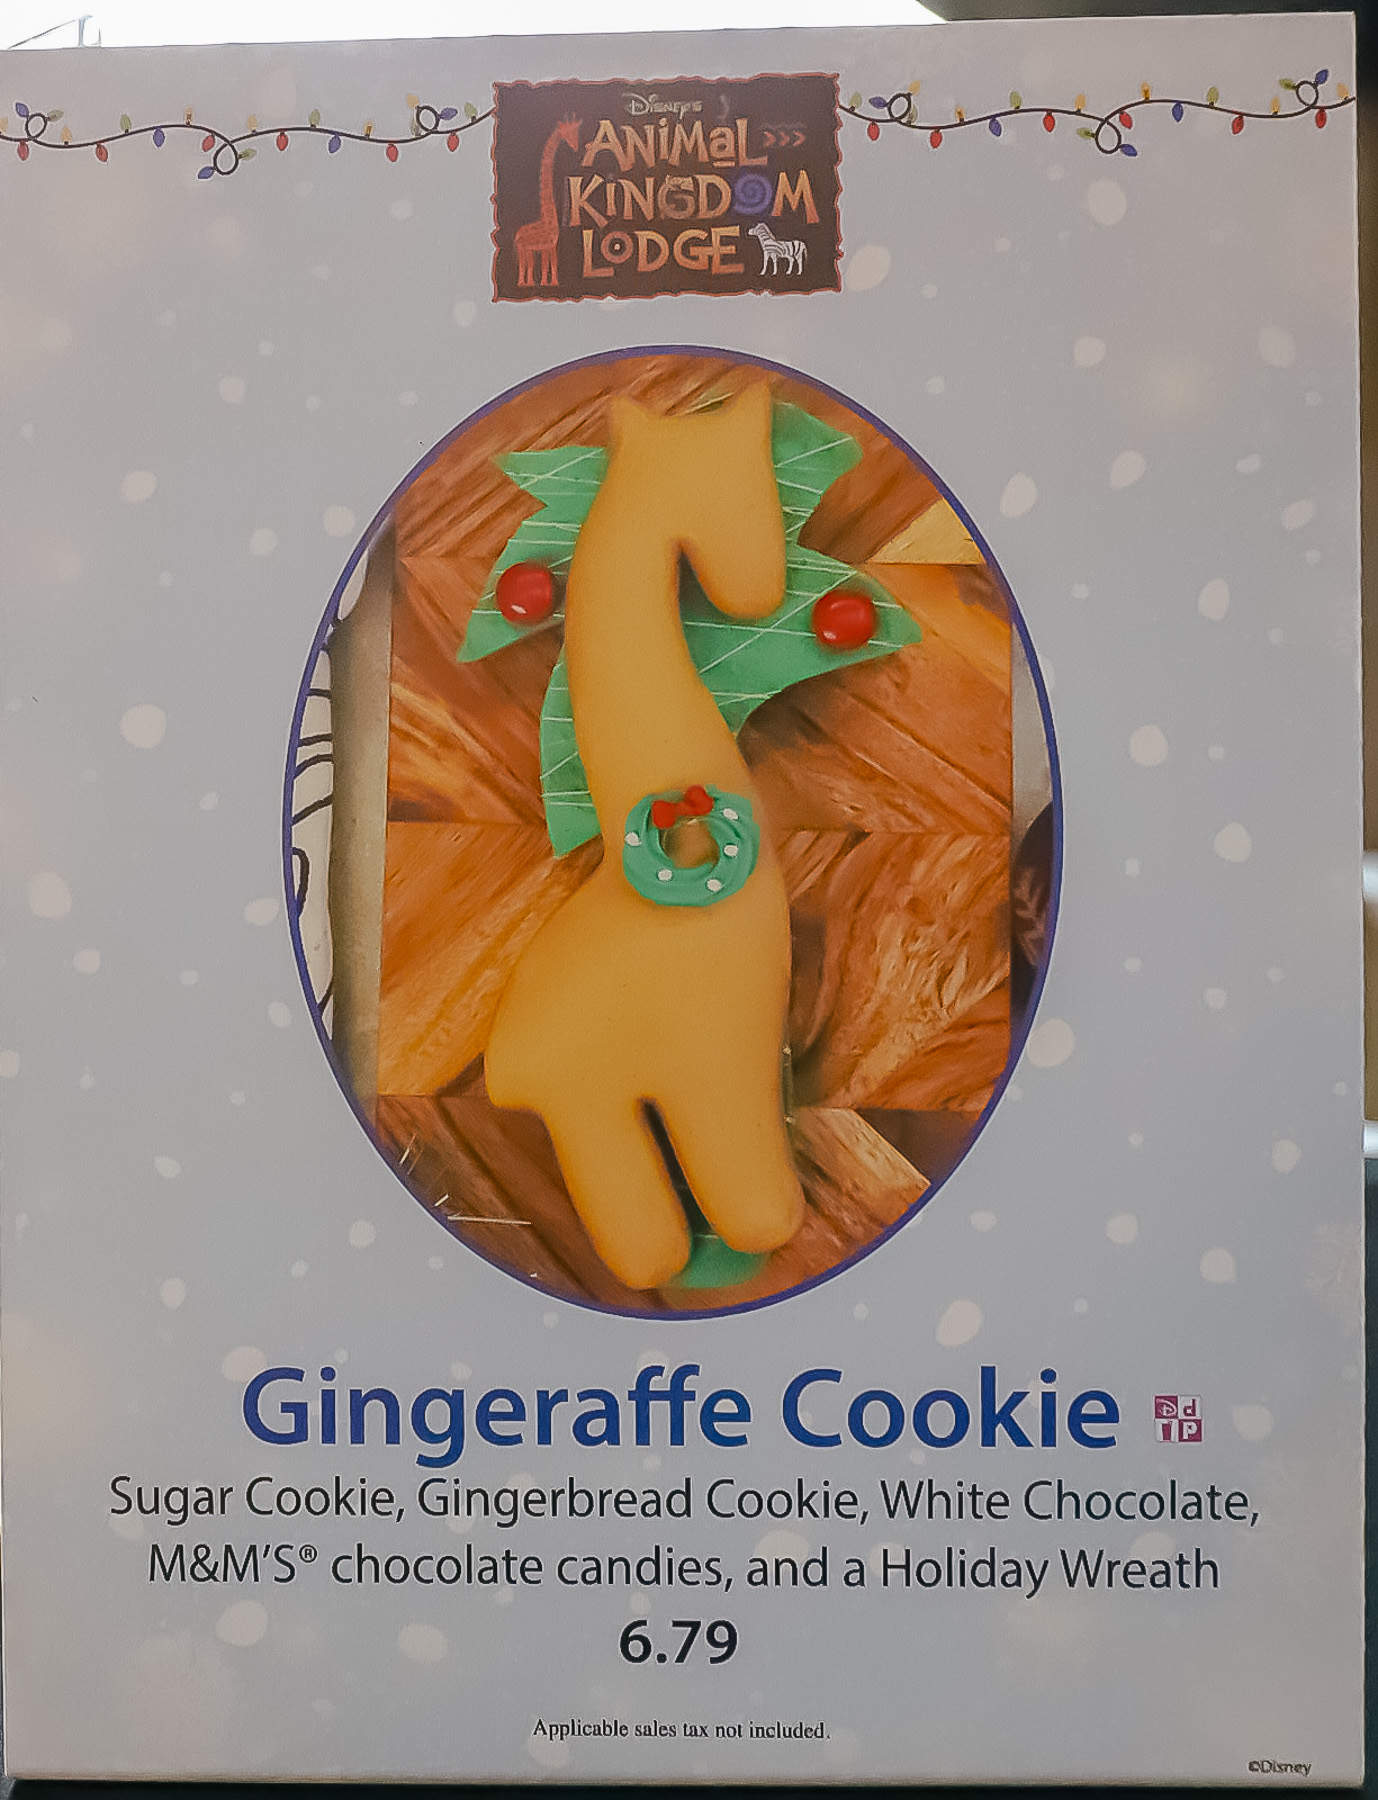 gingeraffe cookie sign that says "M&M's, gingerbread cookie, white chocolate, and a holiday wreath fro $6.79"